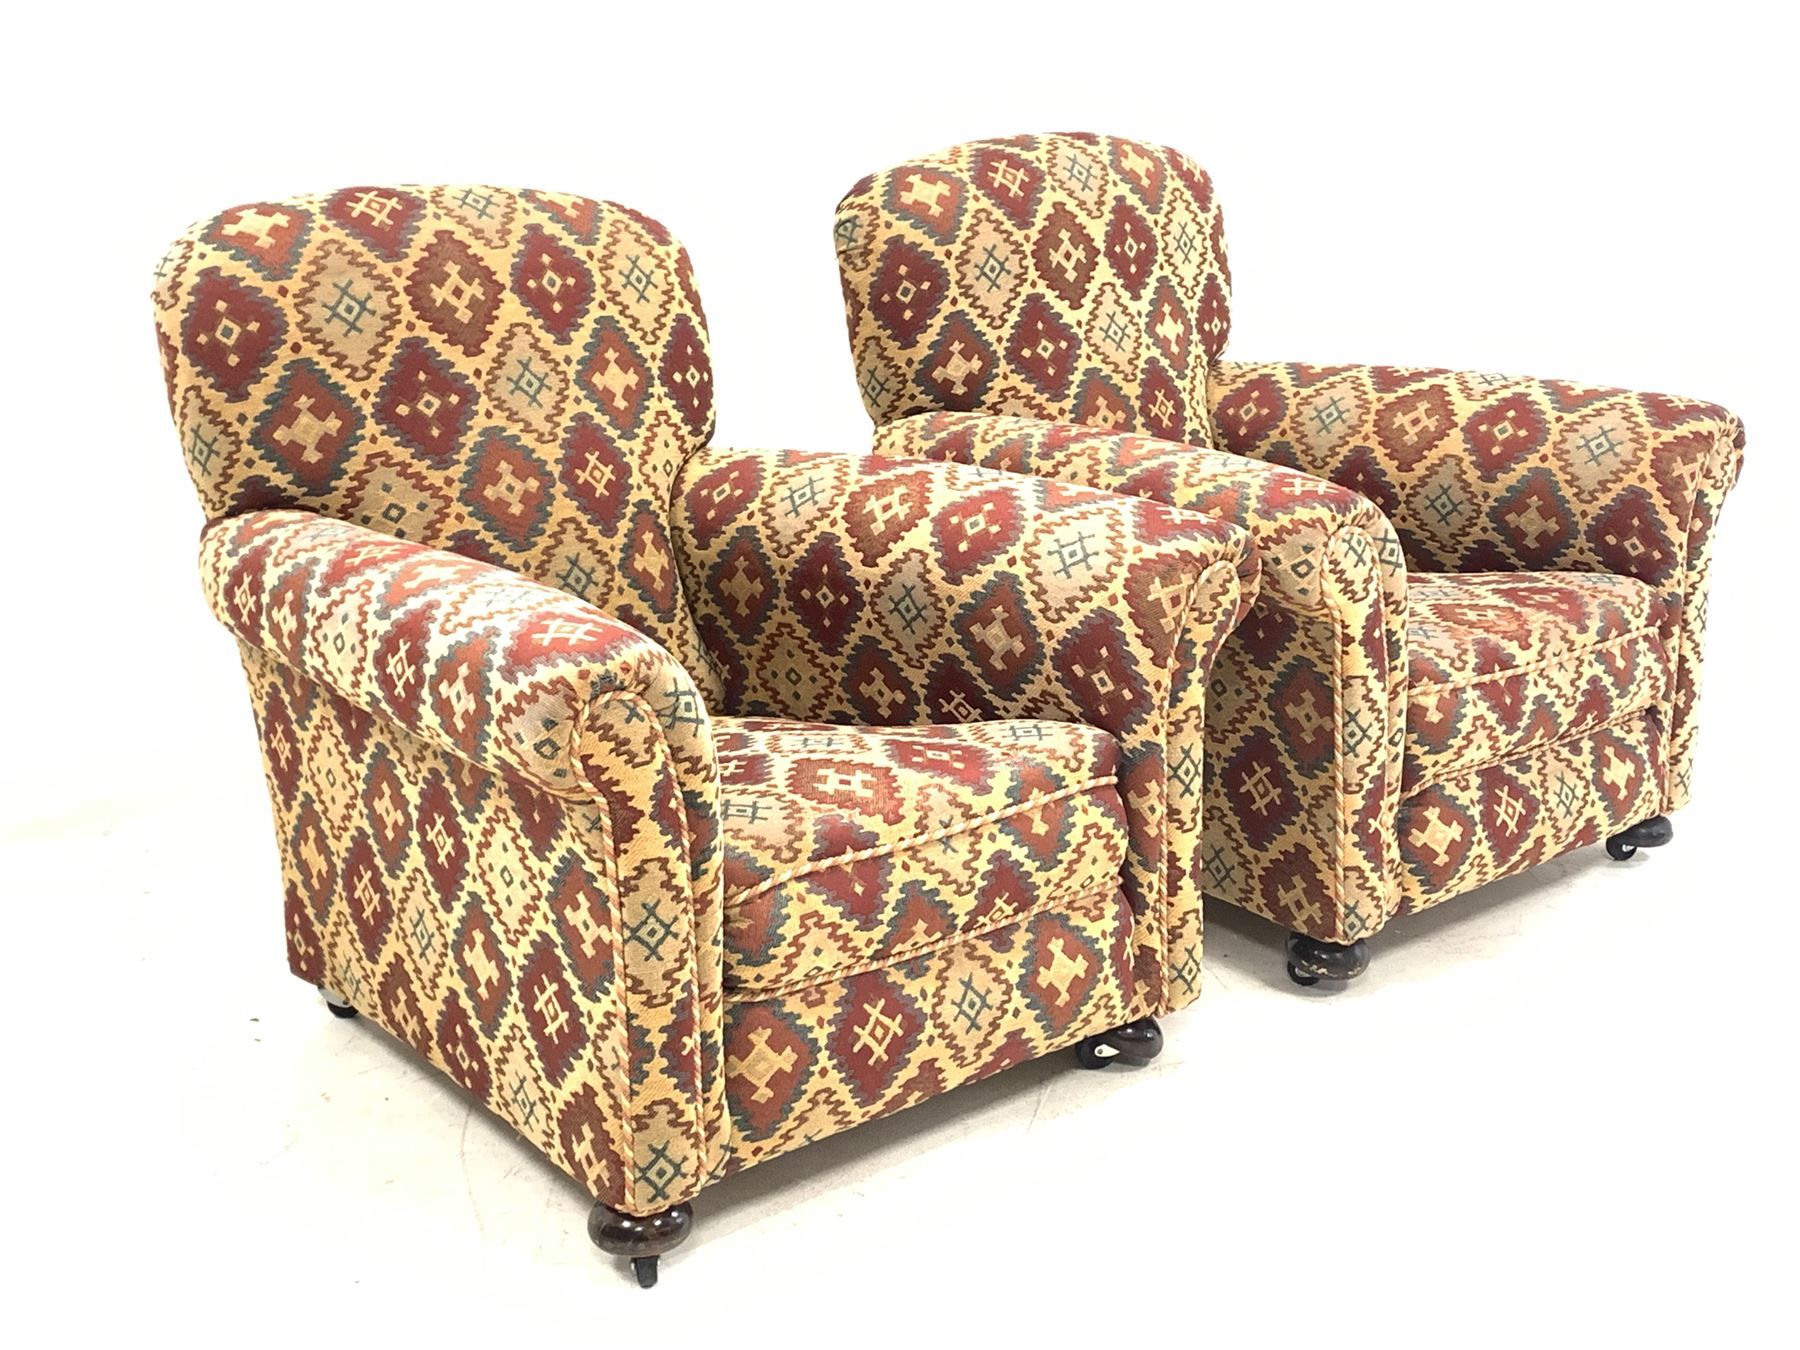 Early 20th century two seat sofa - Image 7 of 10